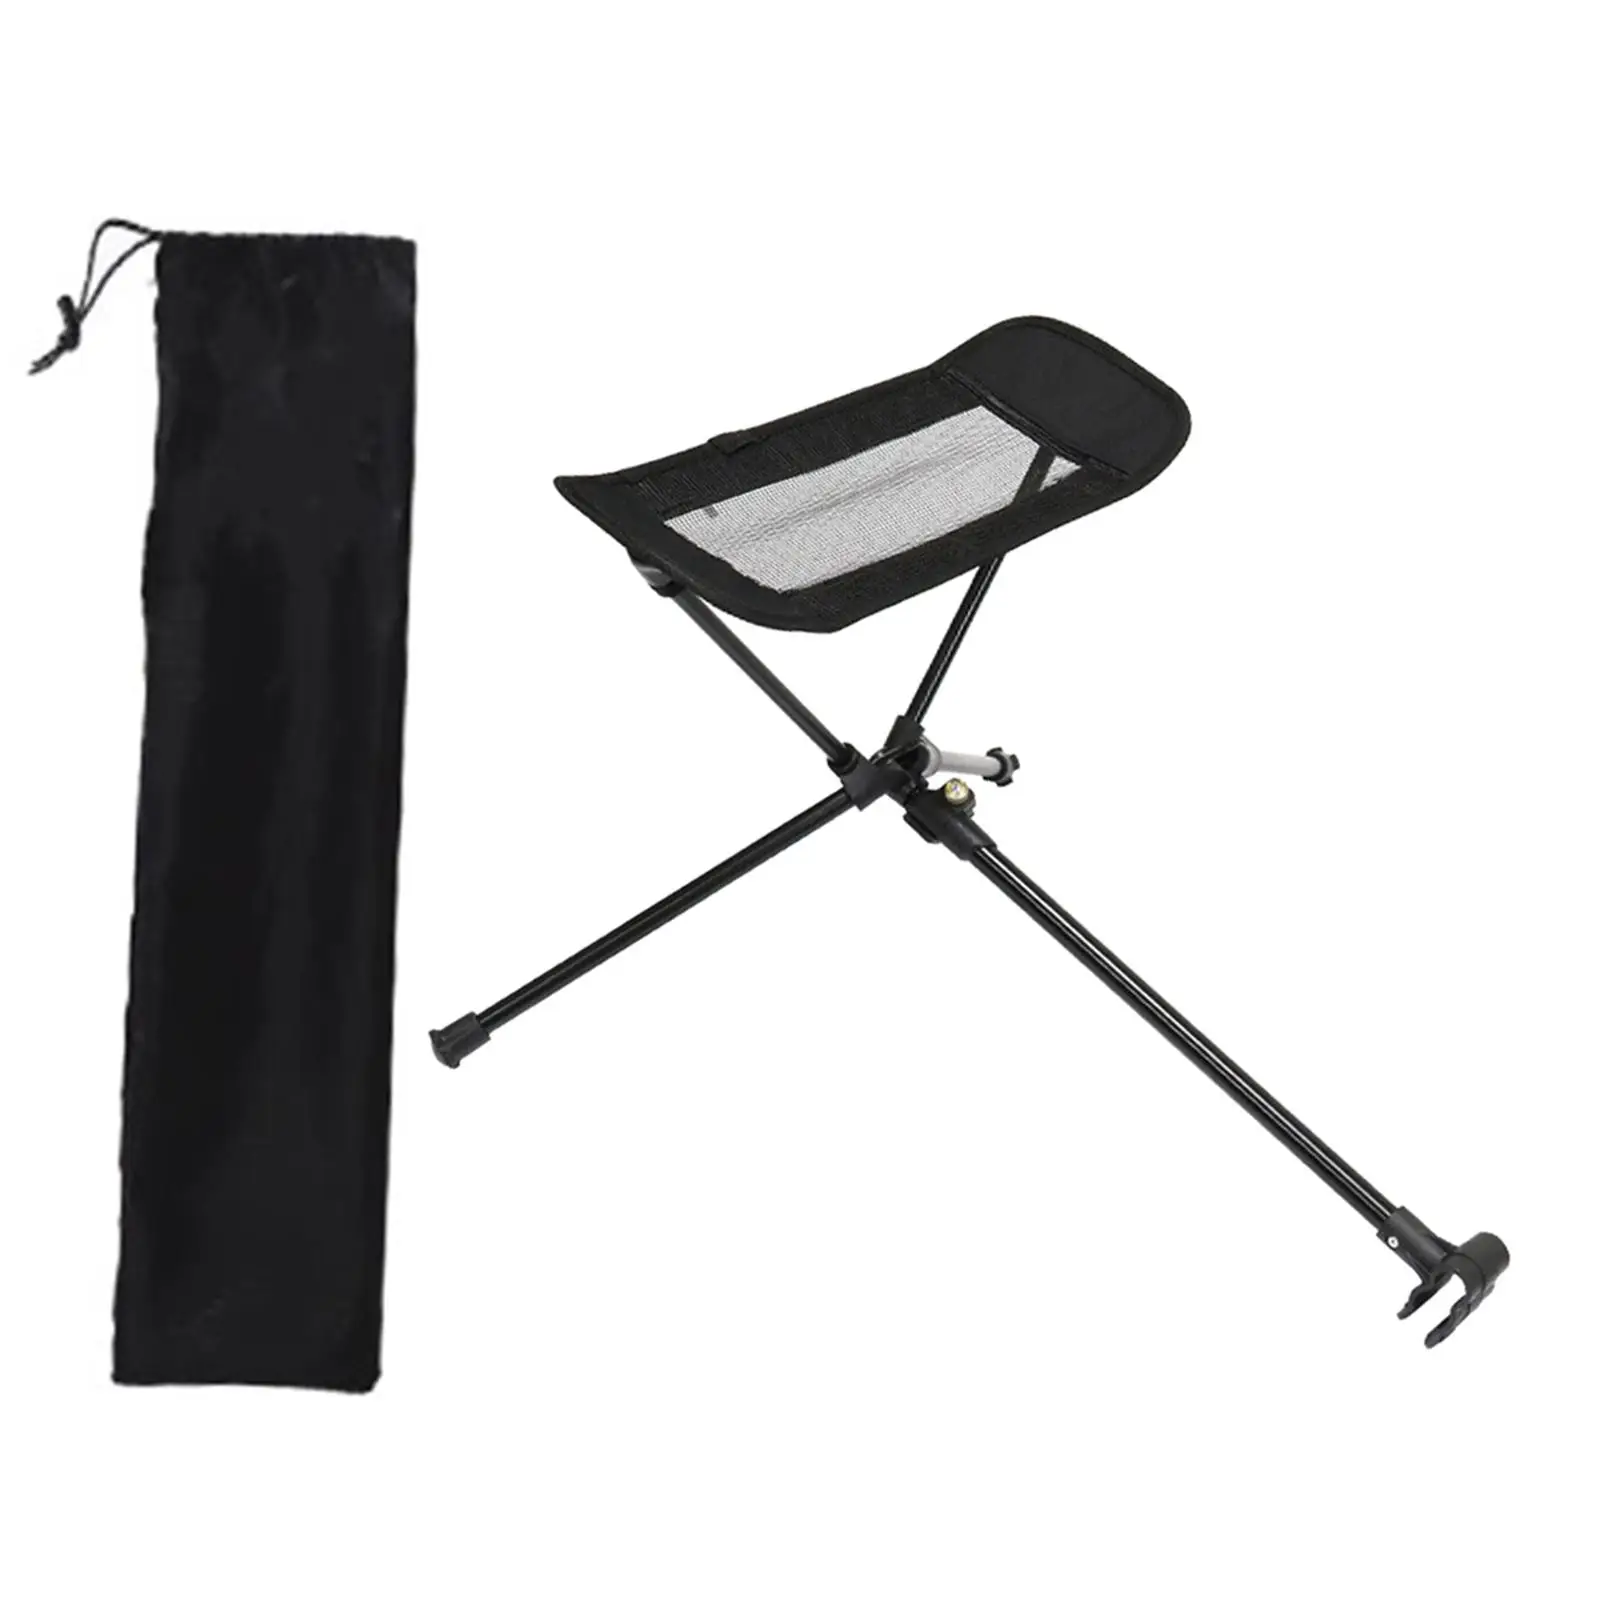 Ultralight Folding Chair Footrest Foldable Resting Bracket Feet Legs Rest Foot Stool Foot Rest for Fishing Camping